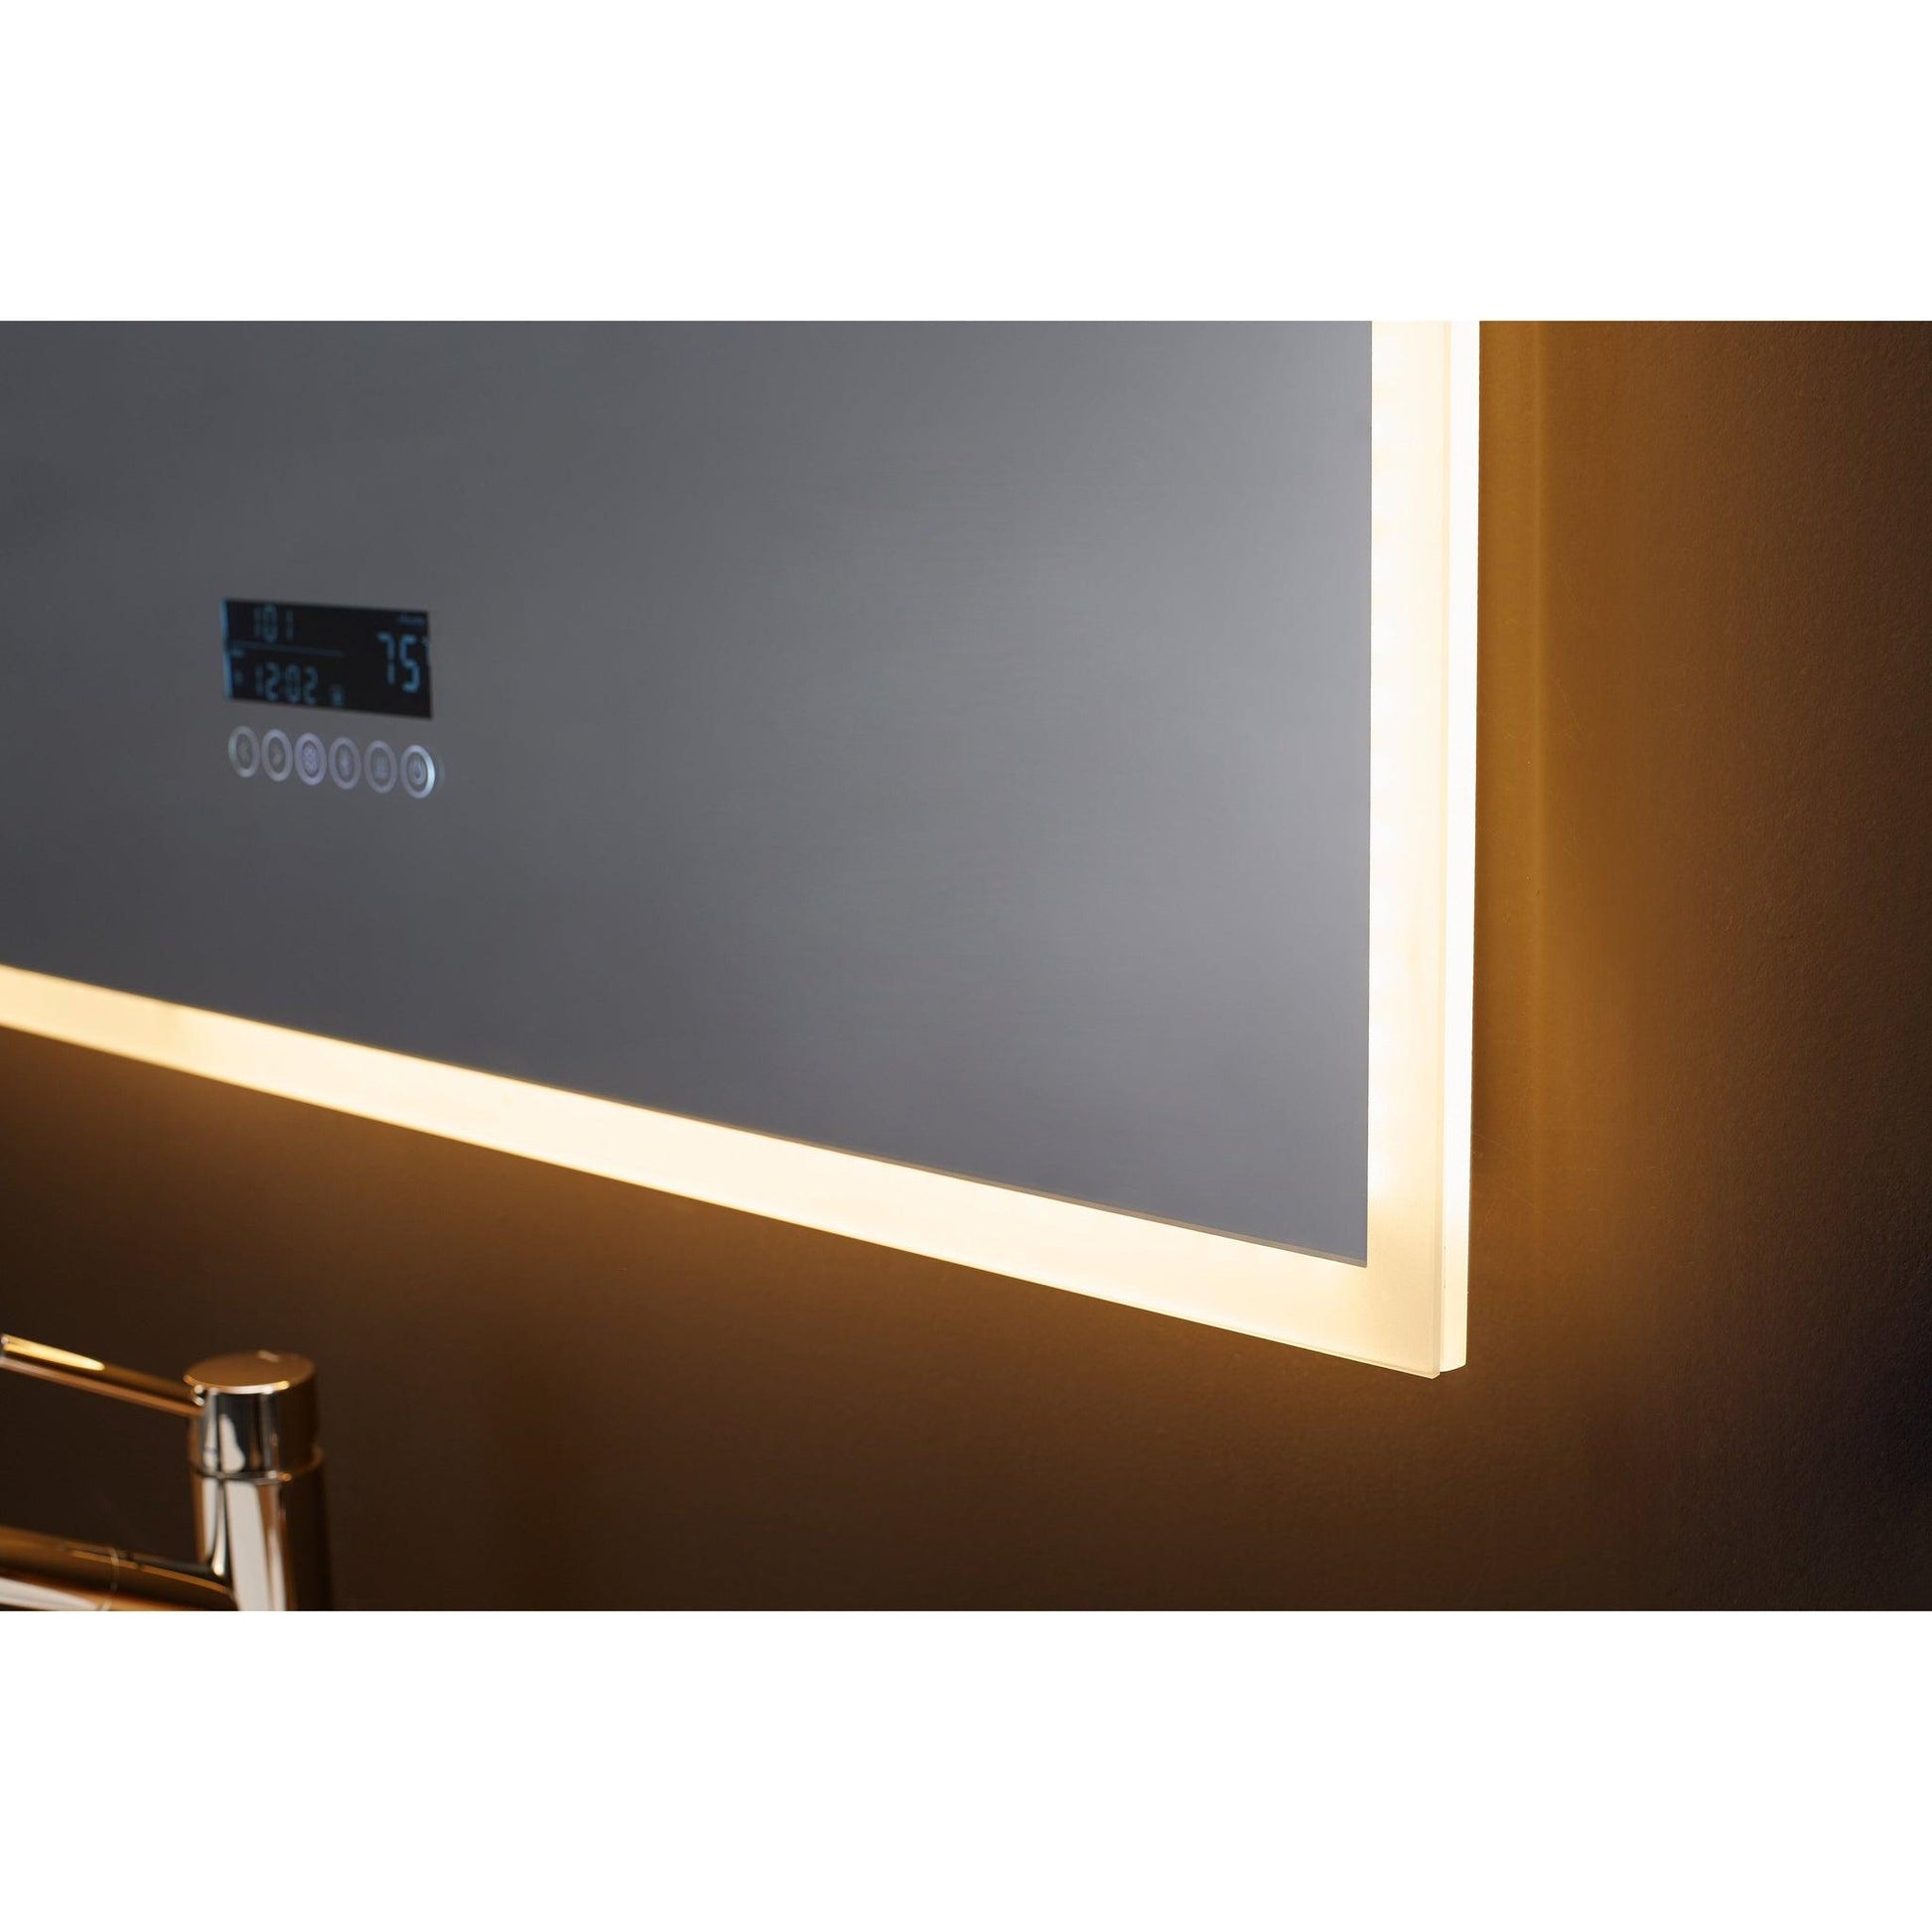 Ancerre Designs Immersion 24" x 40" Modern Rectangle LED Lighted Frameless Bathroom Vanity Mirror With Bluetooth, Defogger, Digital Display and Mounting Hardware